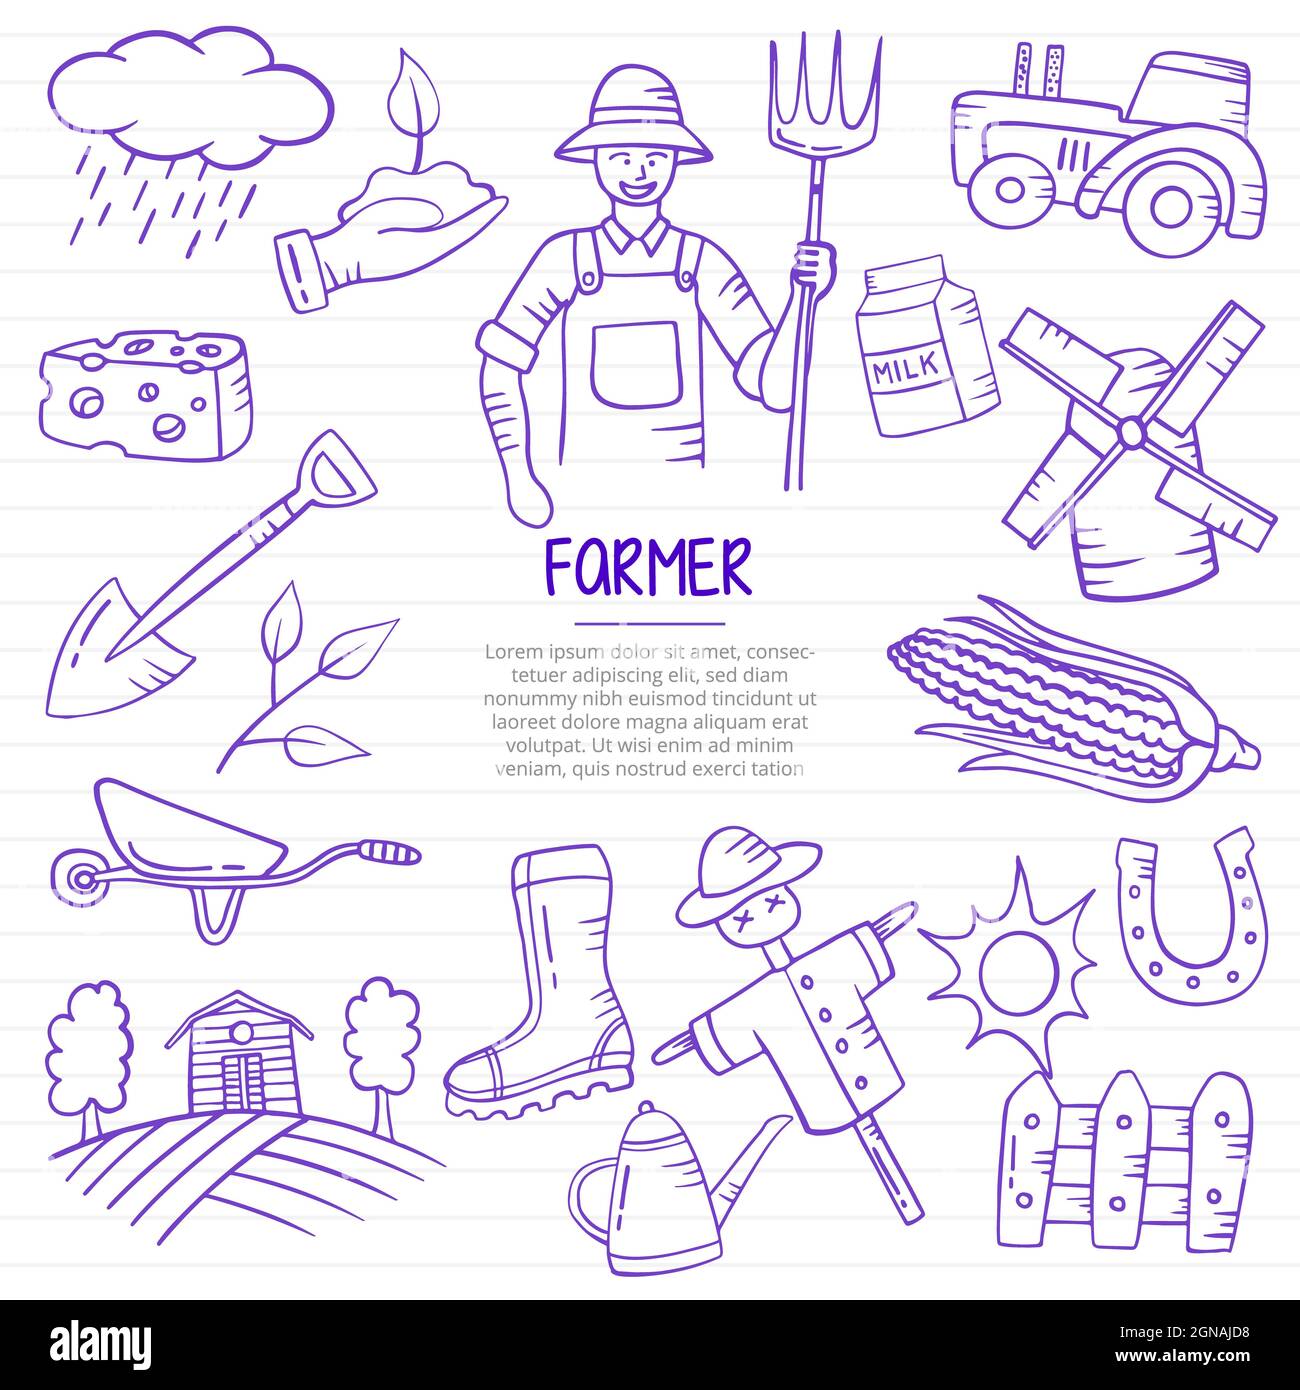 farmer jobs or career professional doodle hand drawn with outline style on paper books line vector illustration Stock Photo